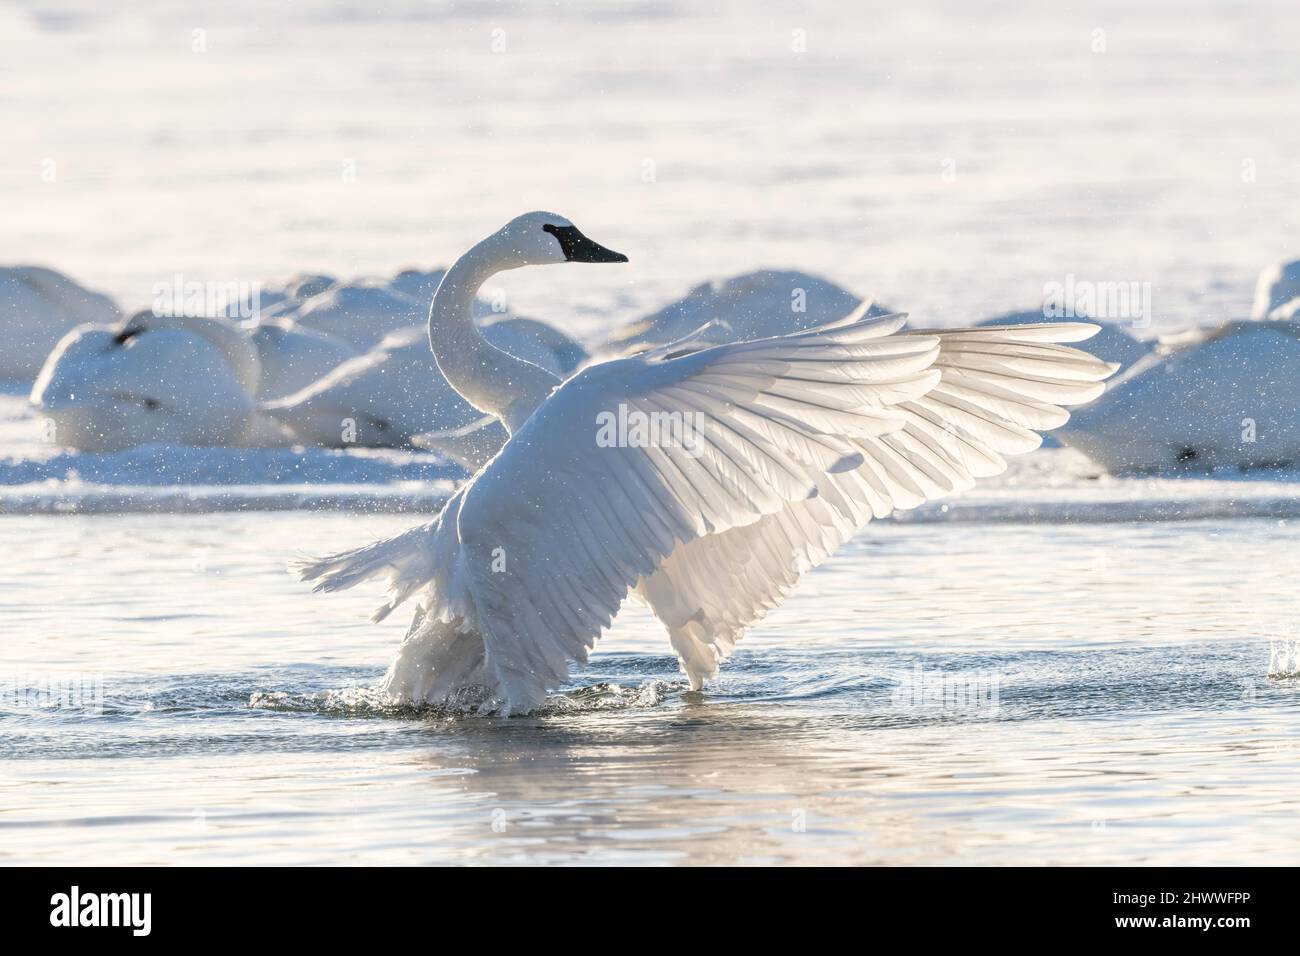 Trumpeter swans (Cygnus buccinator) stretching wings, St Croix river, Winter, WI, USA, by Dominique Braud/Dembinsky Photo Assoc Stock Photo